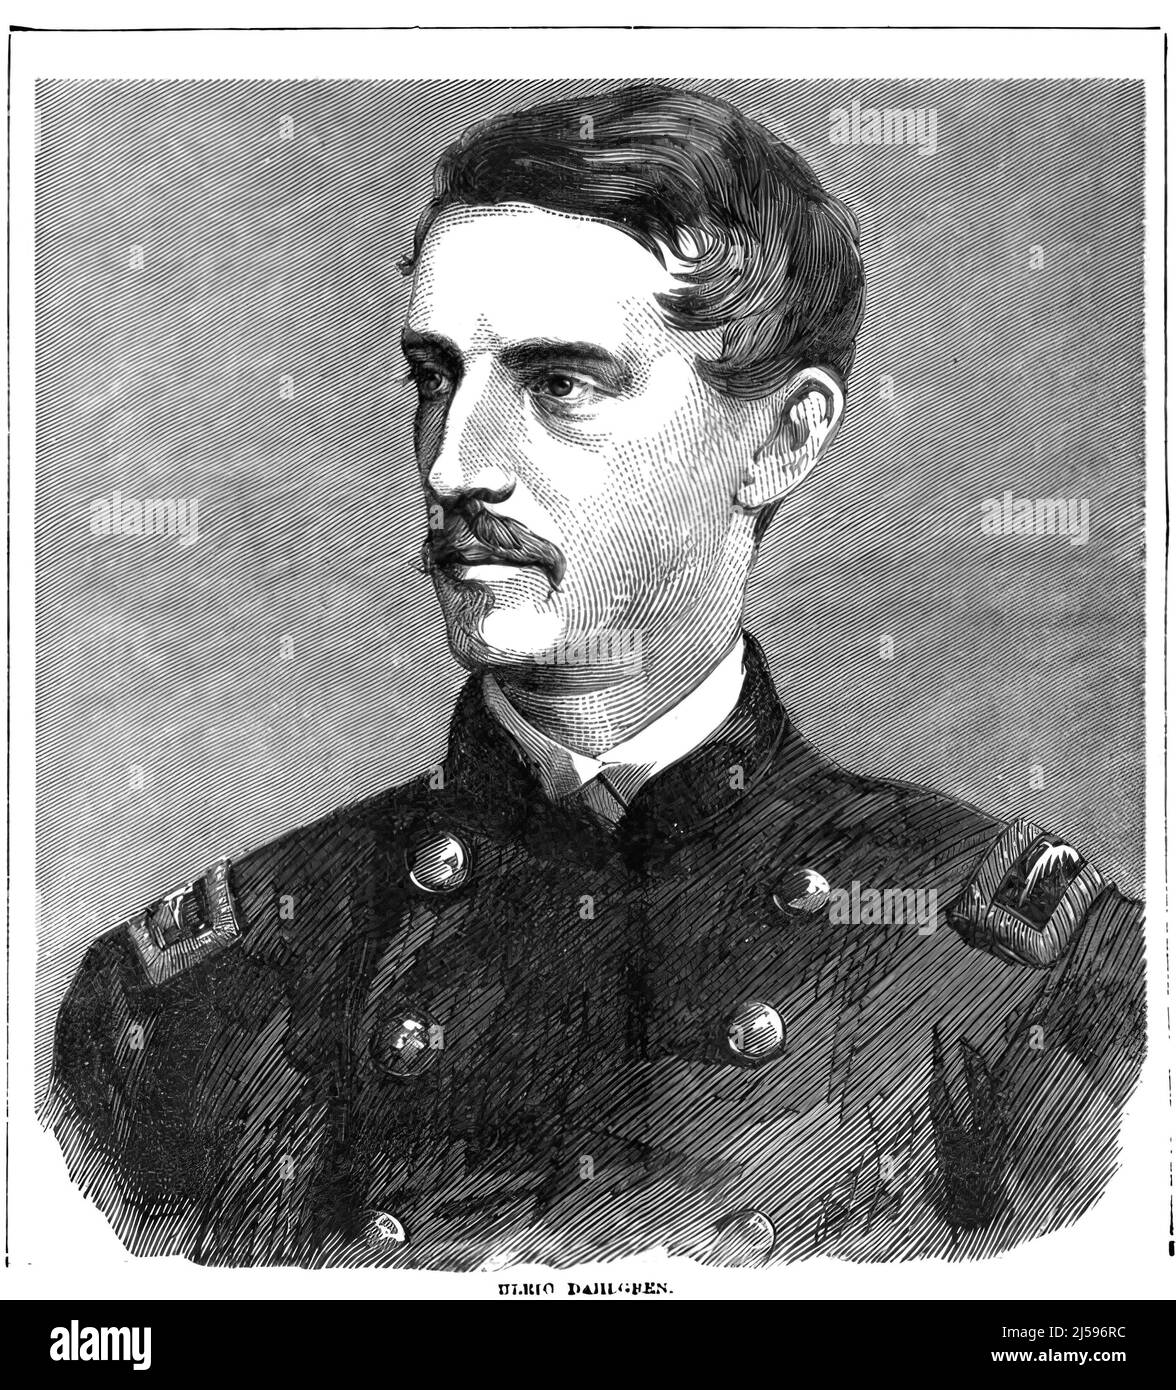 Portrait of Ulric Dahlgren, colonel in the Union Army in the American Civil War. 19th century illustration Stock Photo